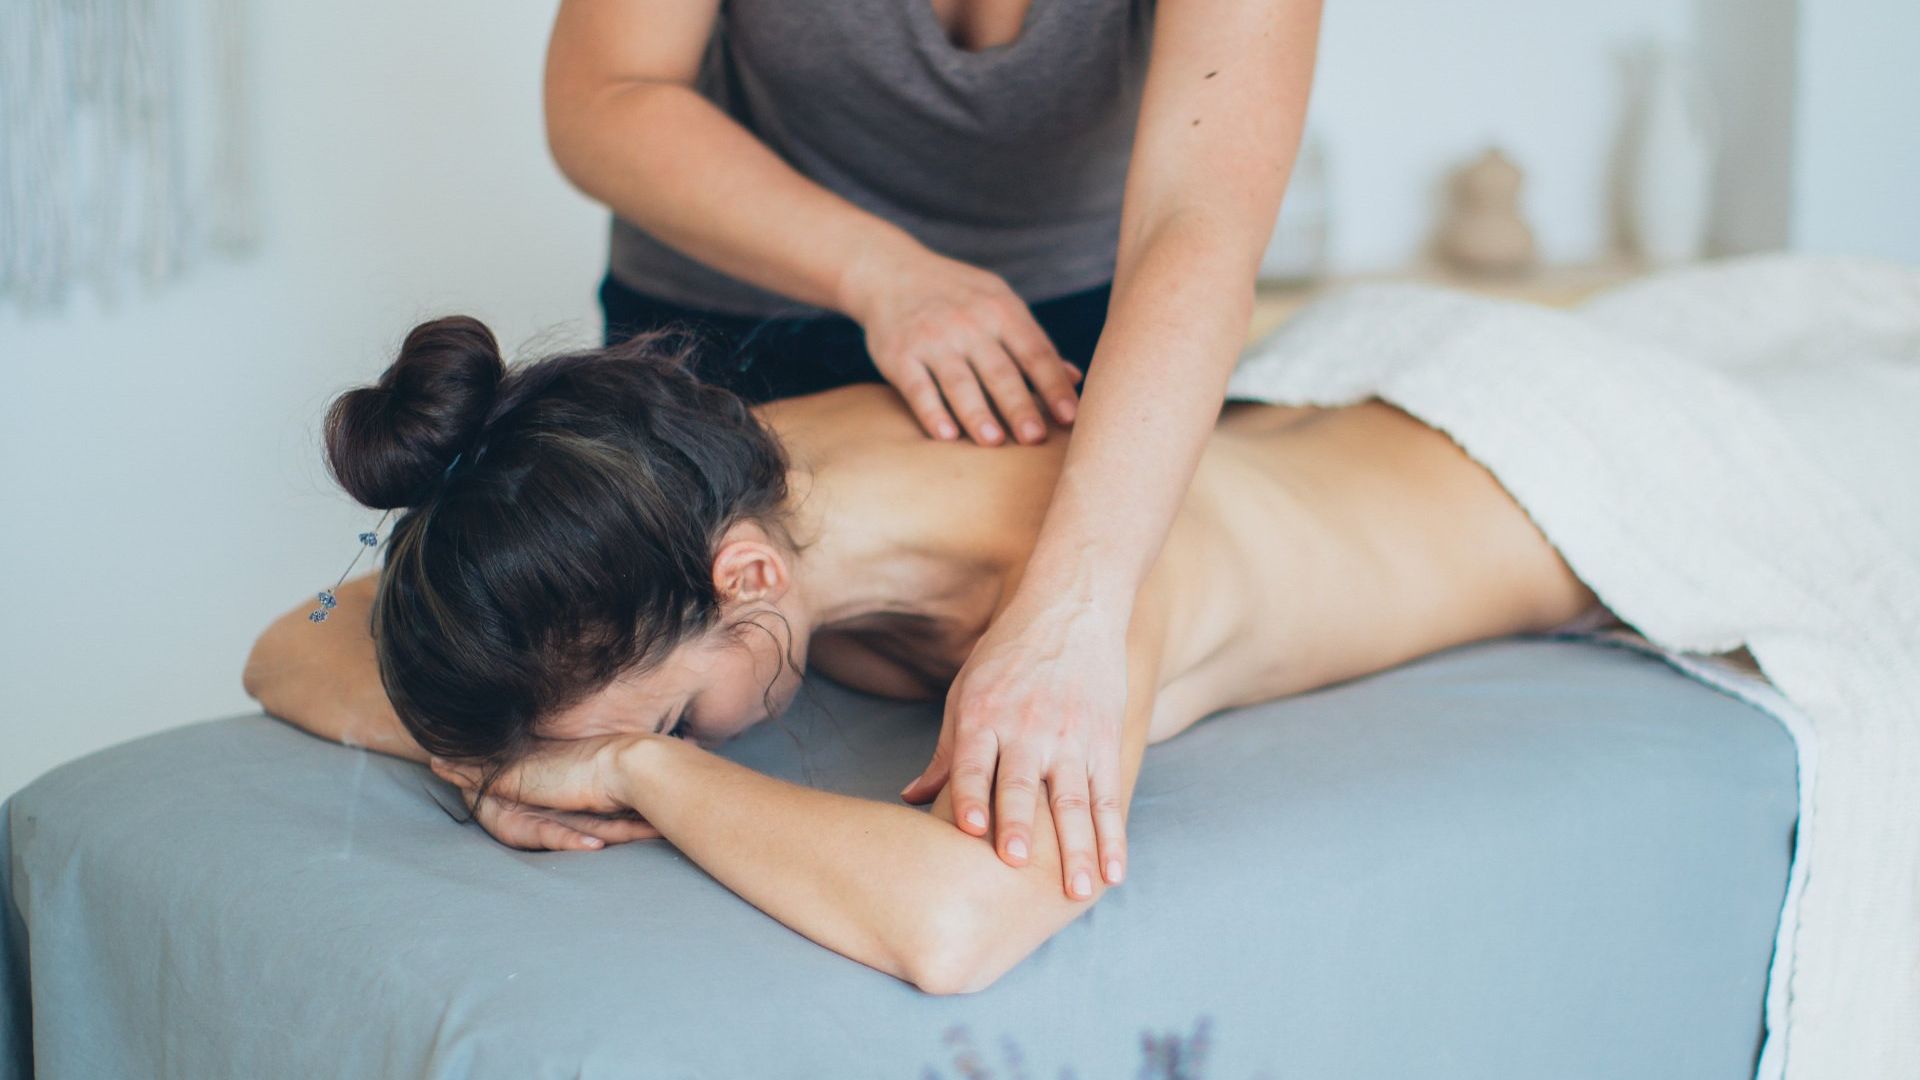 A woman receiving a massage for therapy